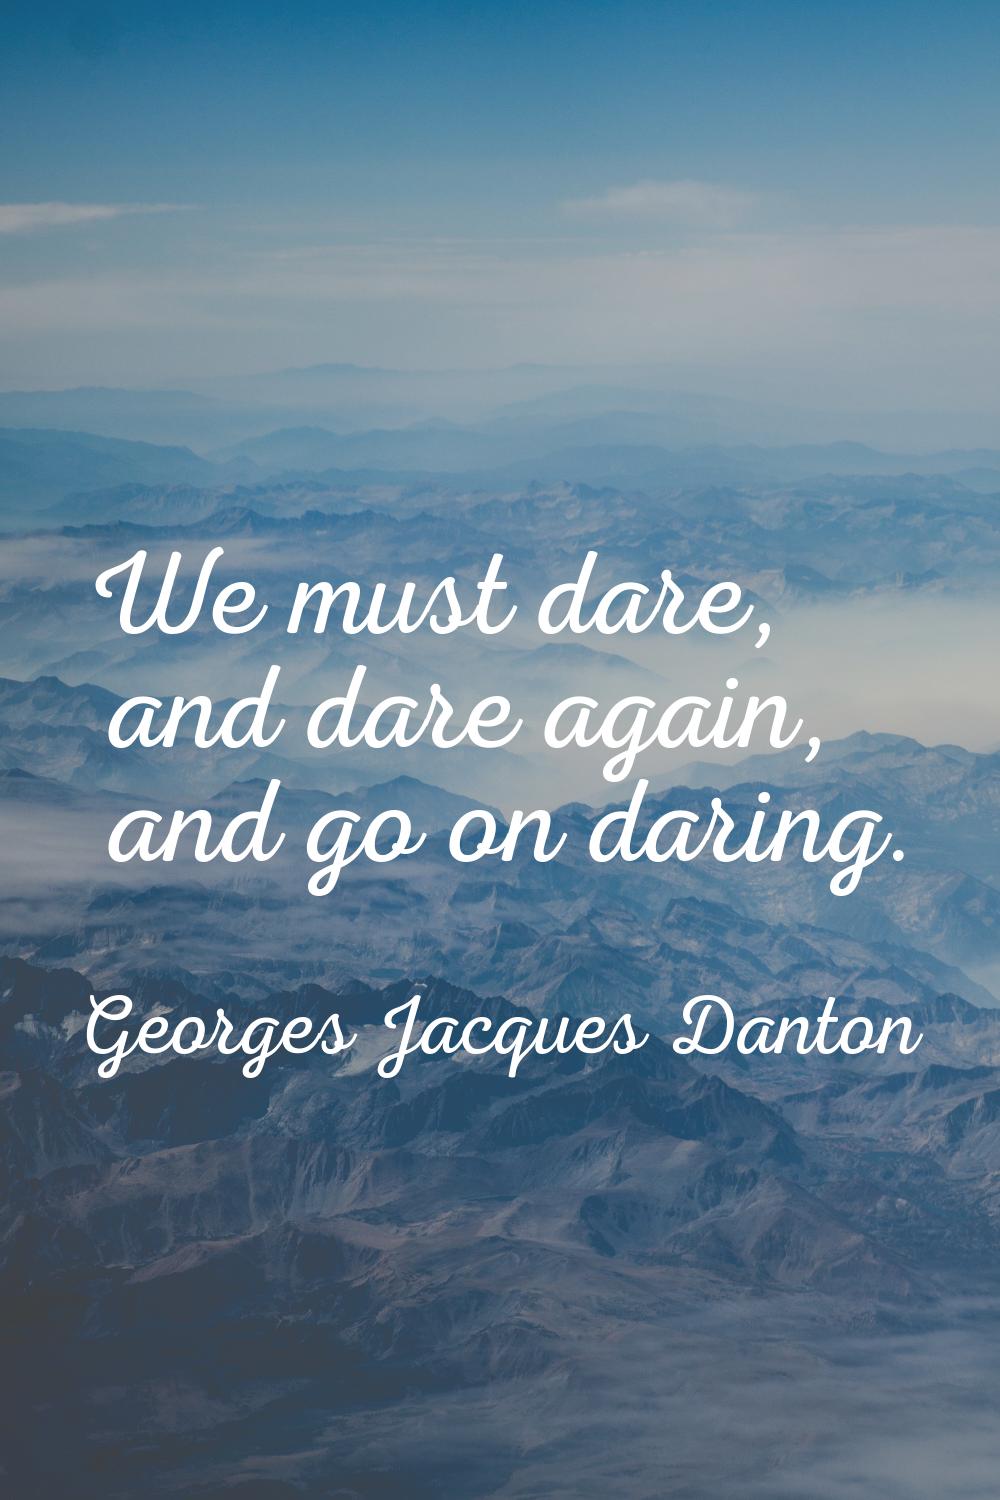 We must dare, and dare again, and go on daring.